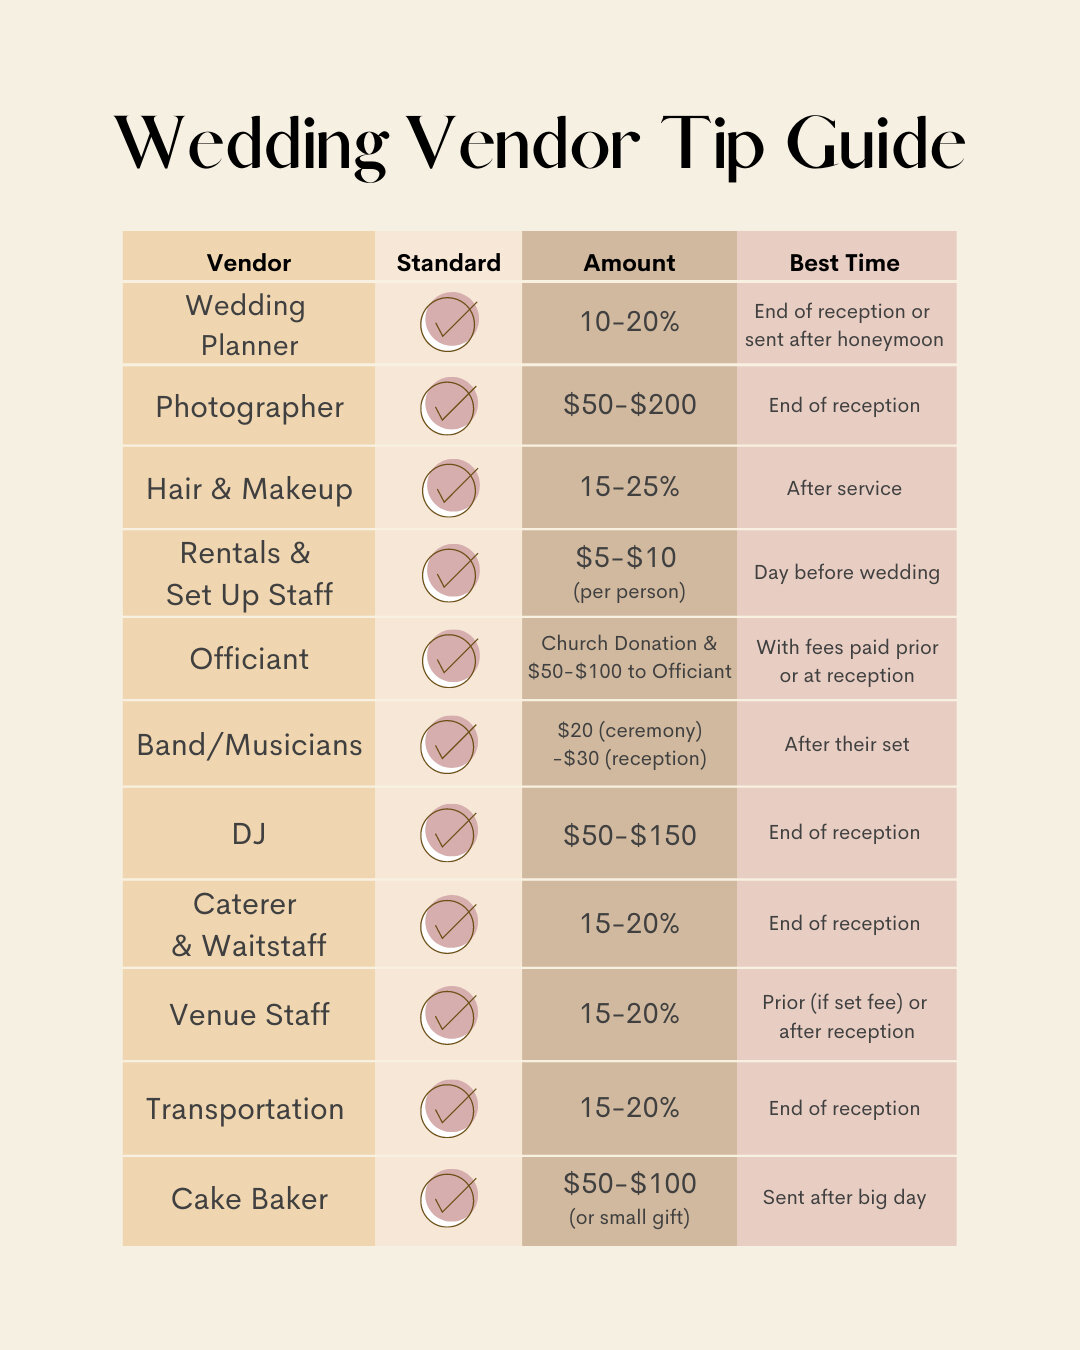 We get asked for this a LOT, so we created a handy cheat sheet. And we also made a handy printable checklist that you can get on the KaseStyles blog! ☑️ ☑️ ☑️​​​​​​​​
​​​​​​​​
Visit https://www.kasestyles.com/blog/wedding-vendor-tip-guide to check it